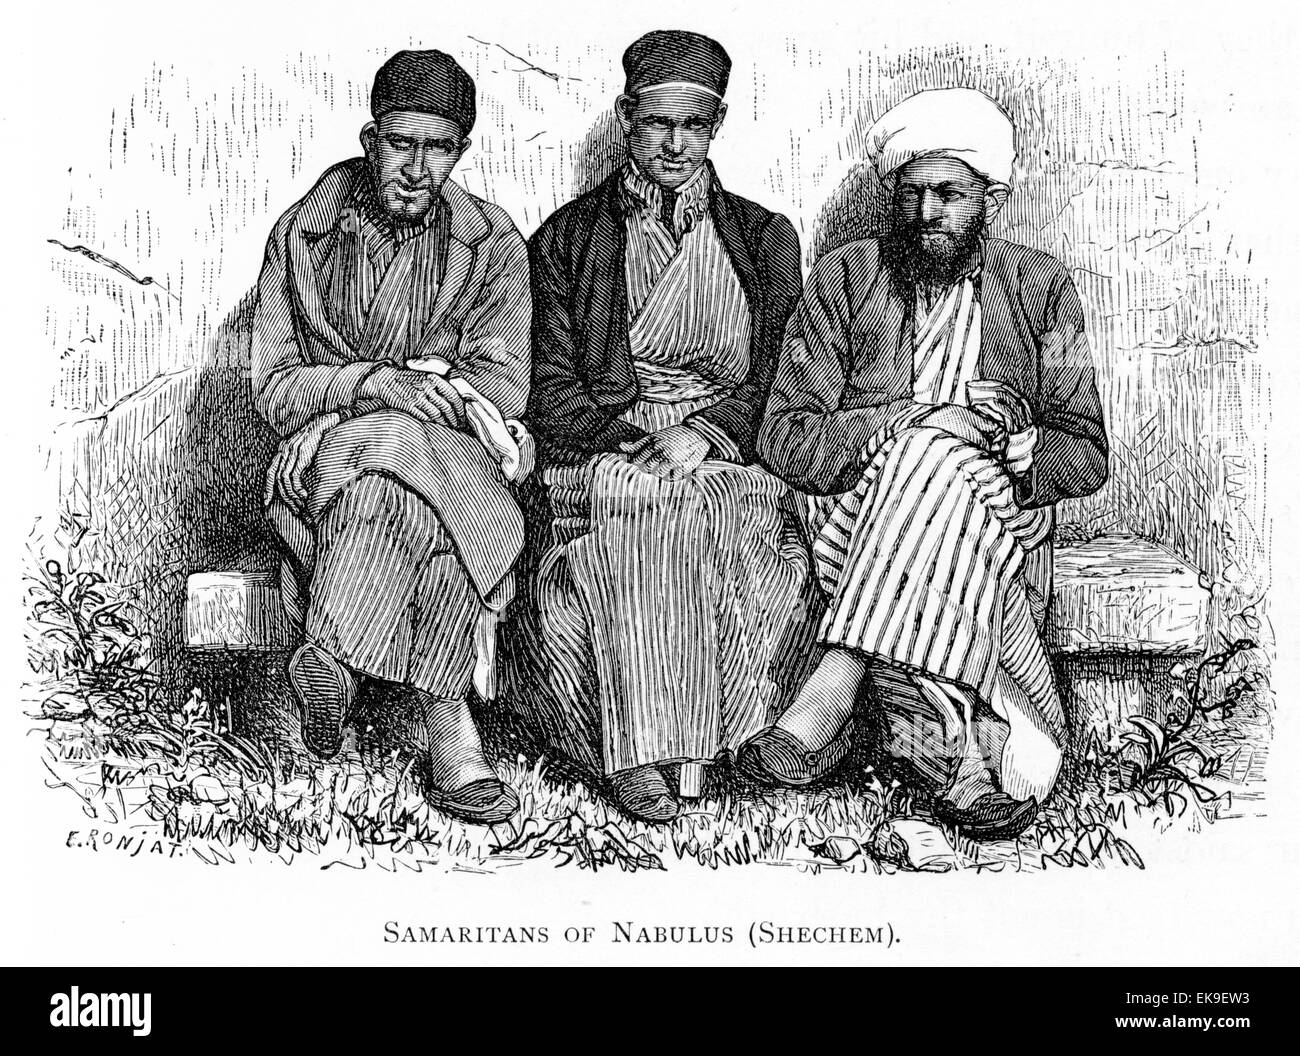 An engraving of Samaritans of Nabulus (Shechem) (now Nablus) scanned at high resolution from a book printed in 1889. Stock Photo